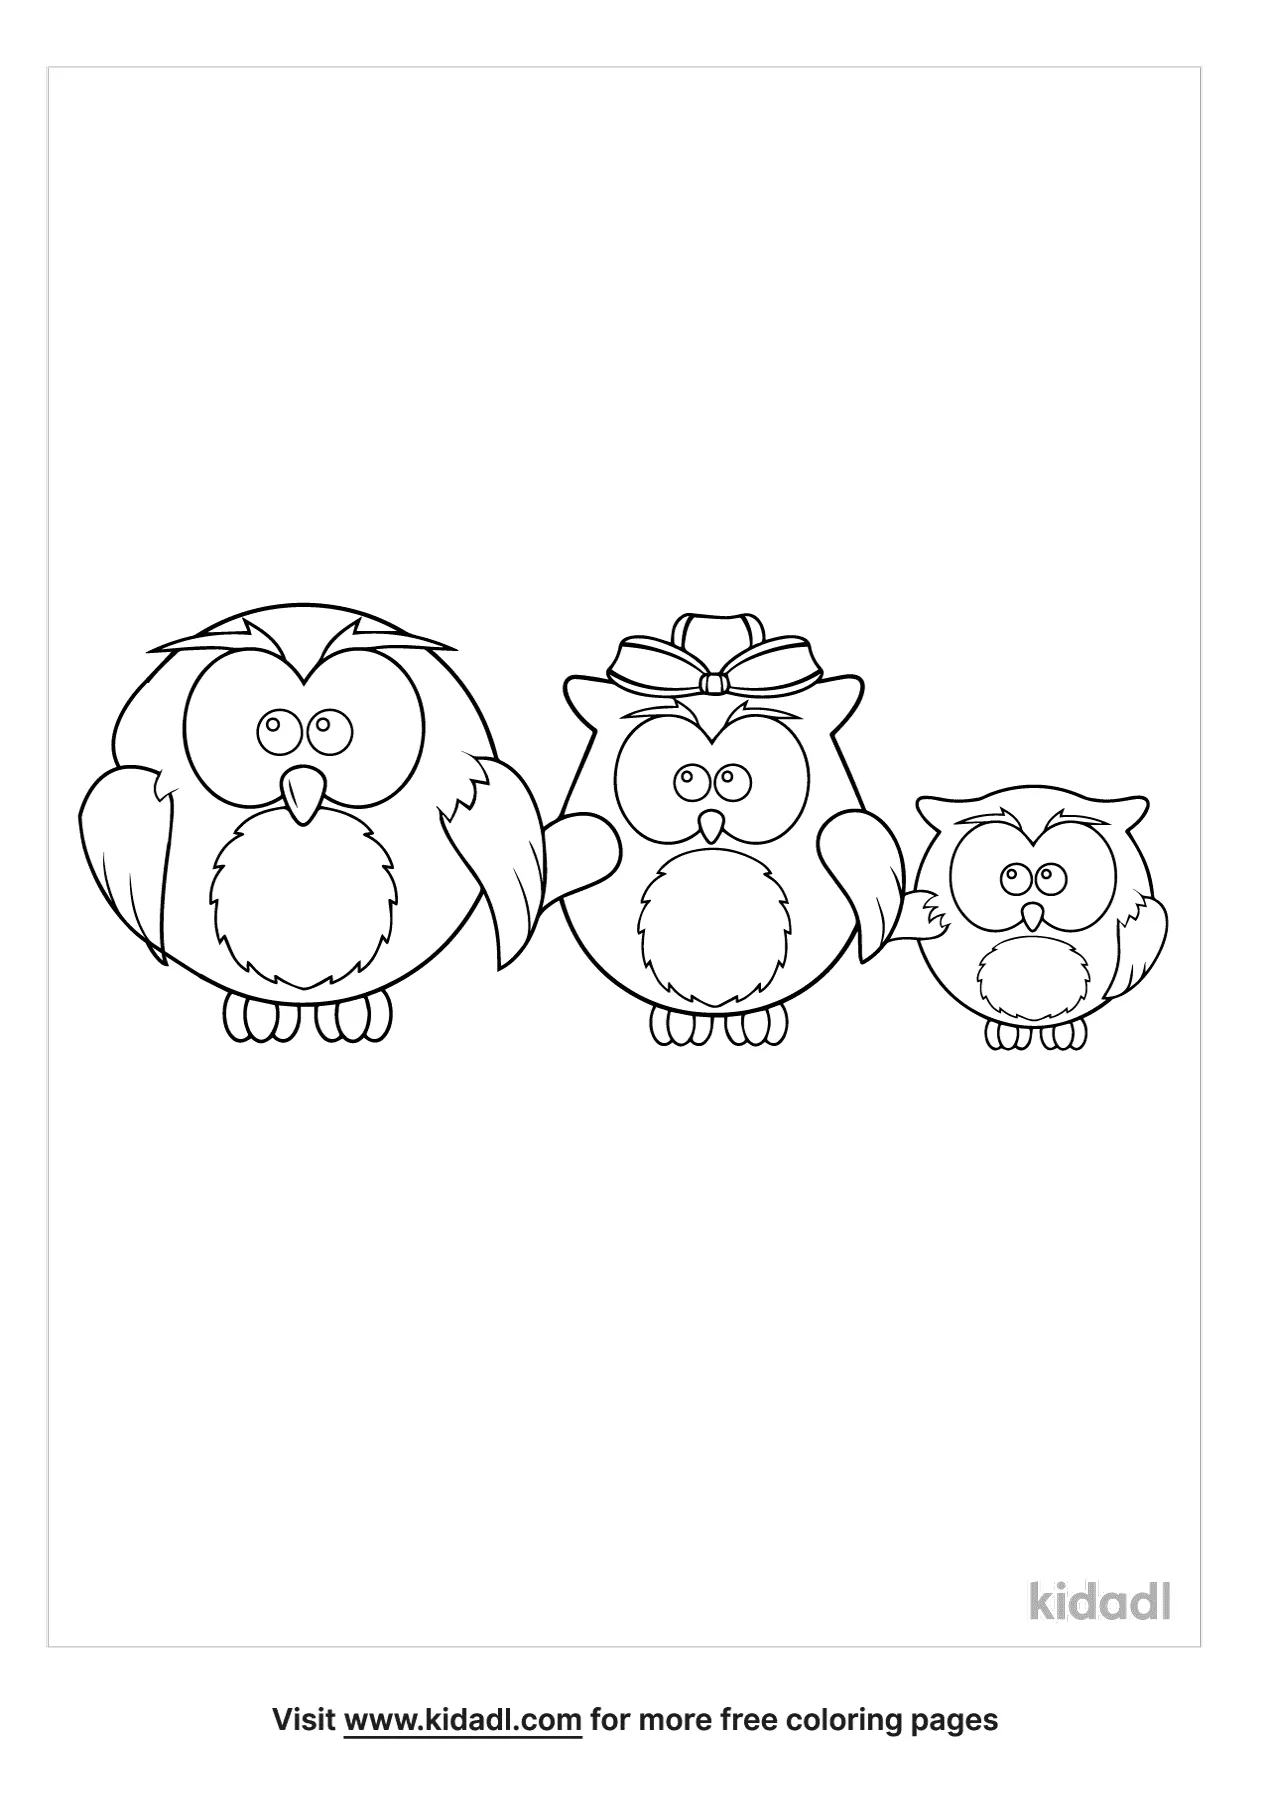 Cute Owl Family Coloring Page